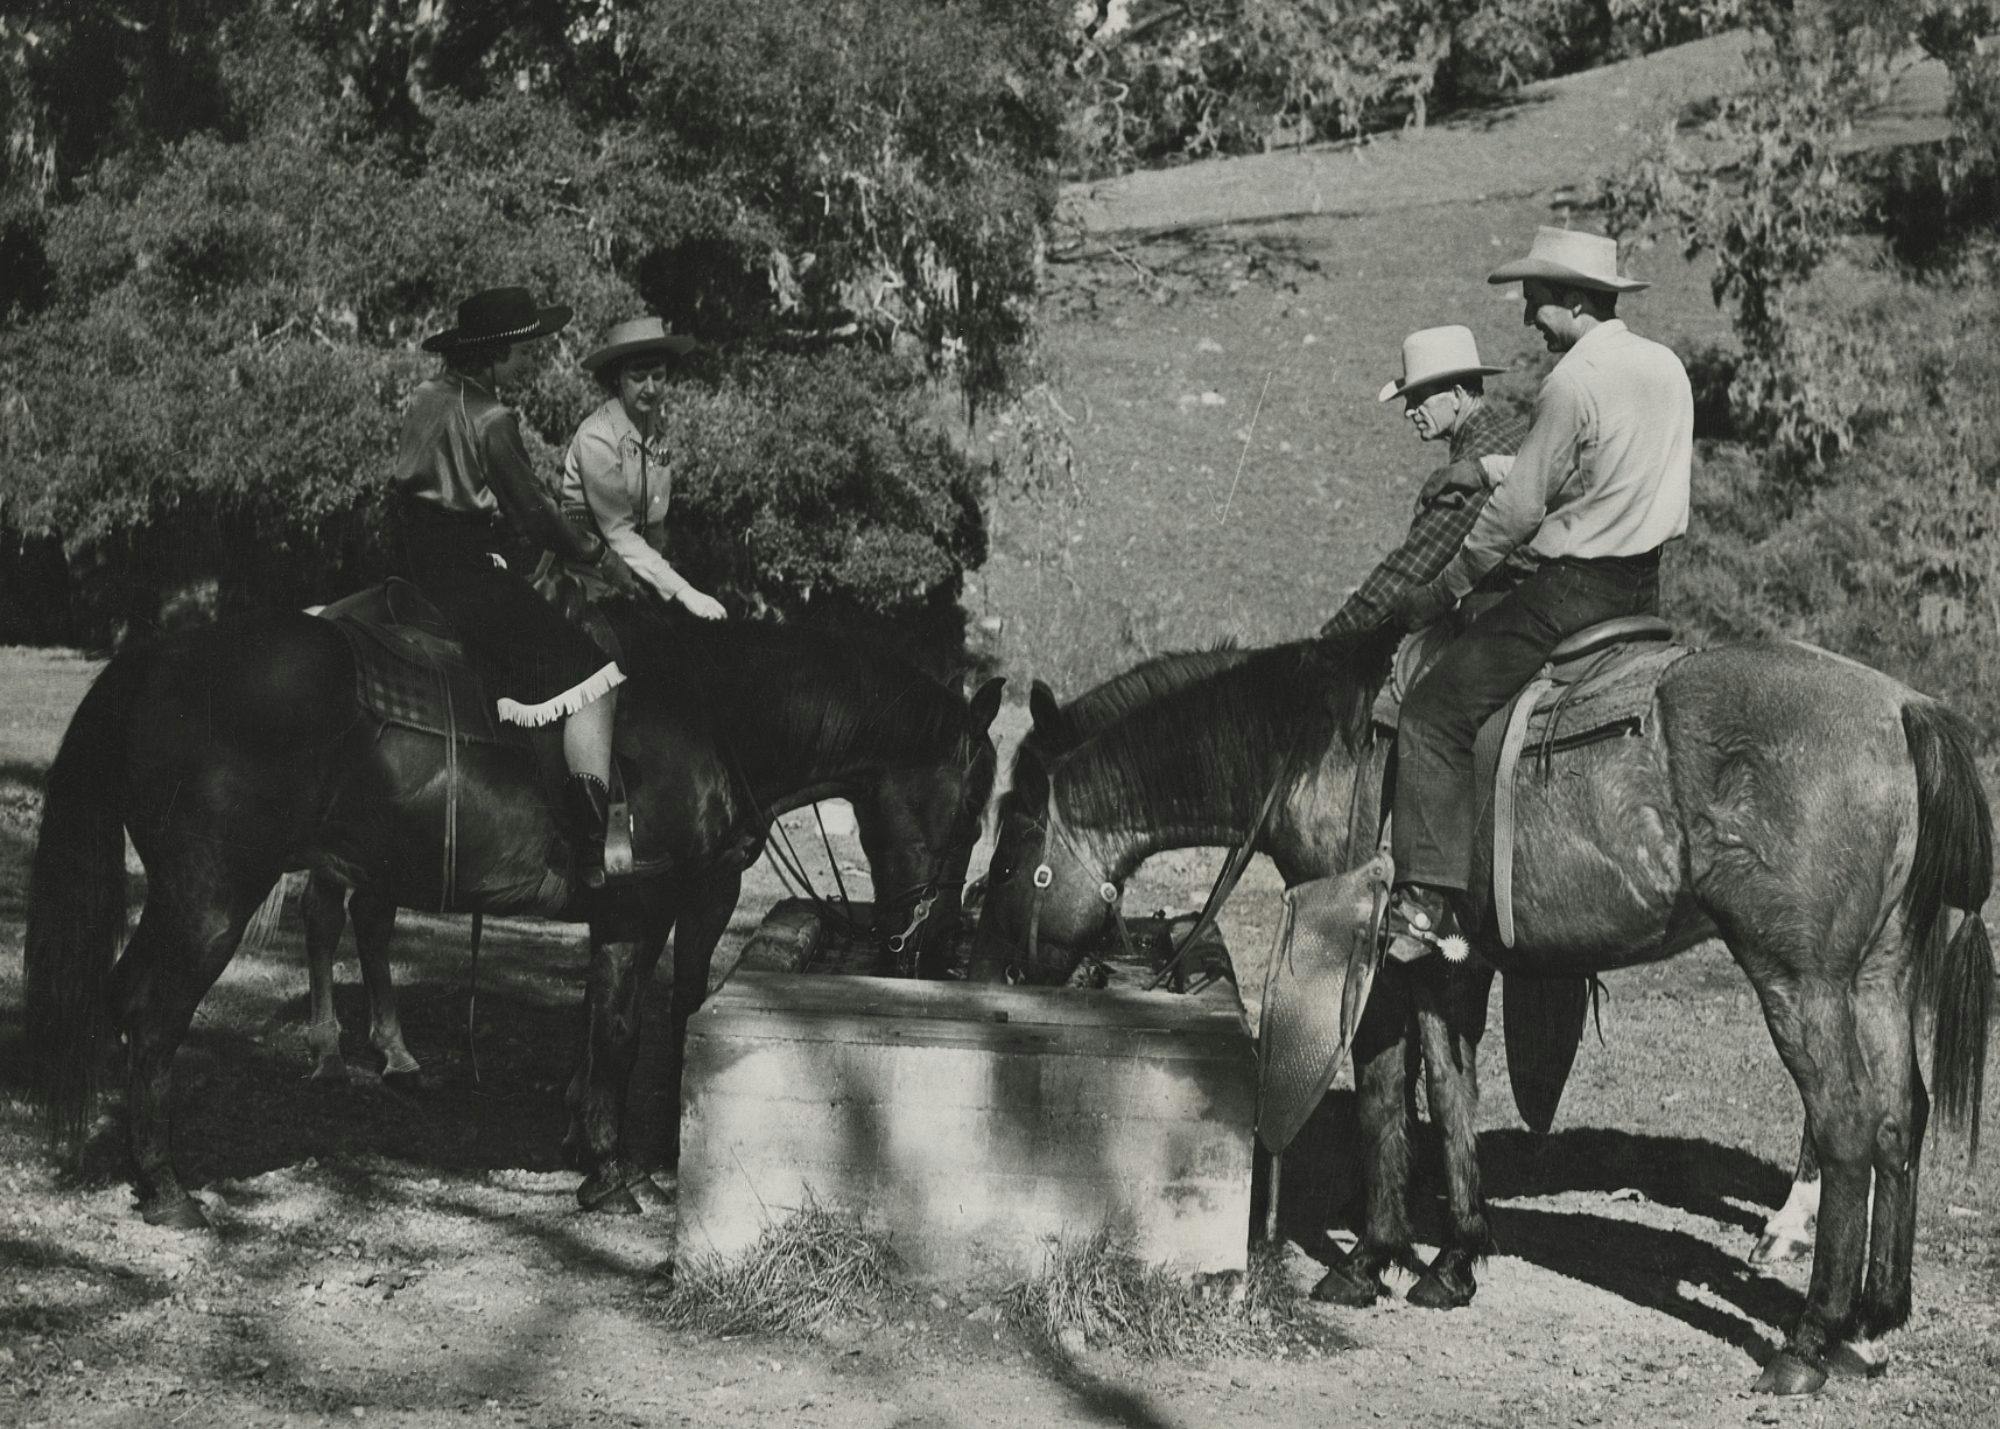 two horses drinking water with people on their backs